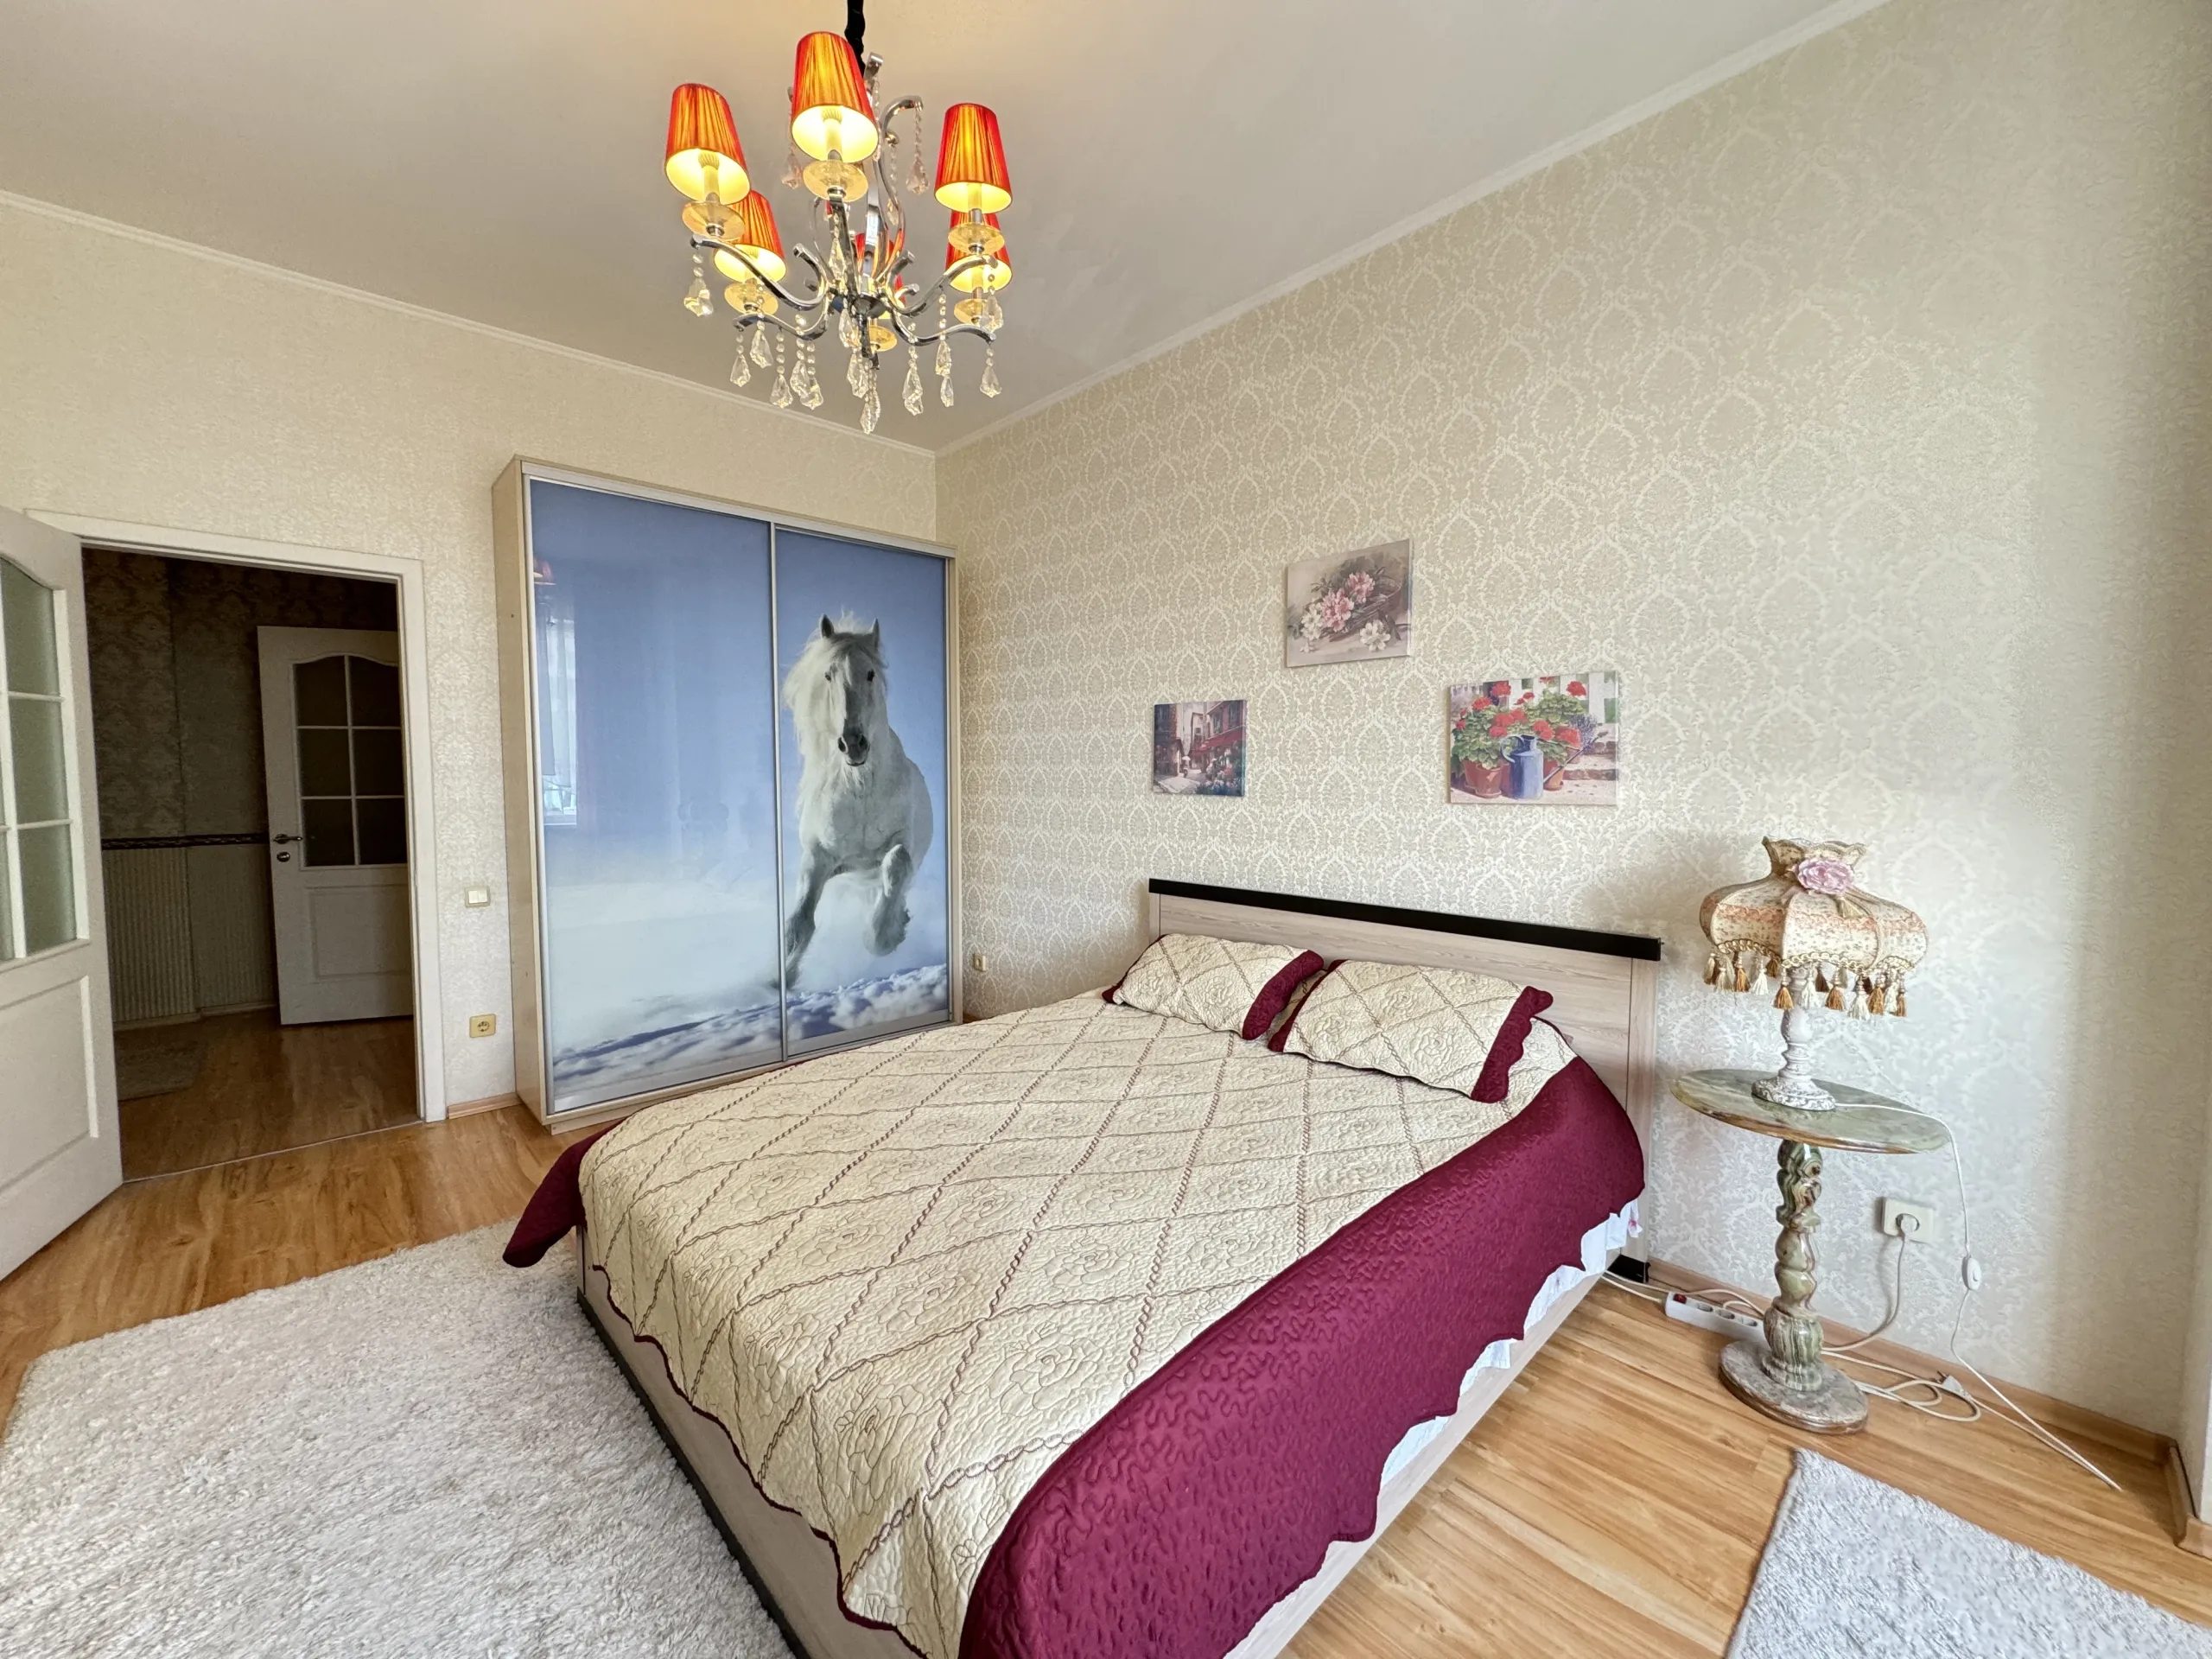 For sale magnificent two-room apartment in the historical center